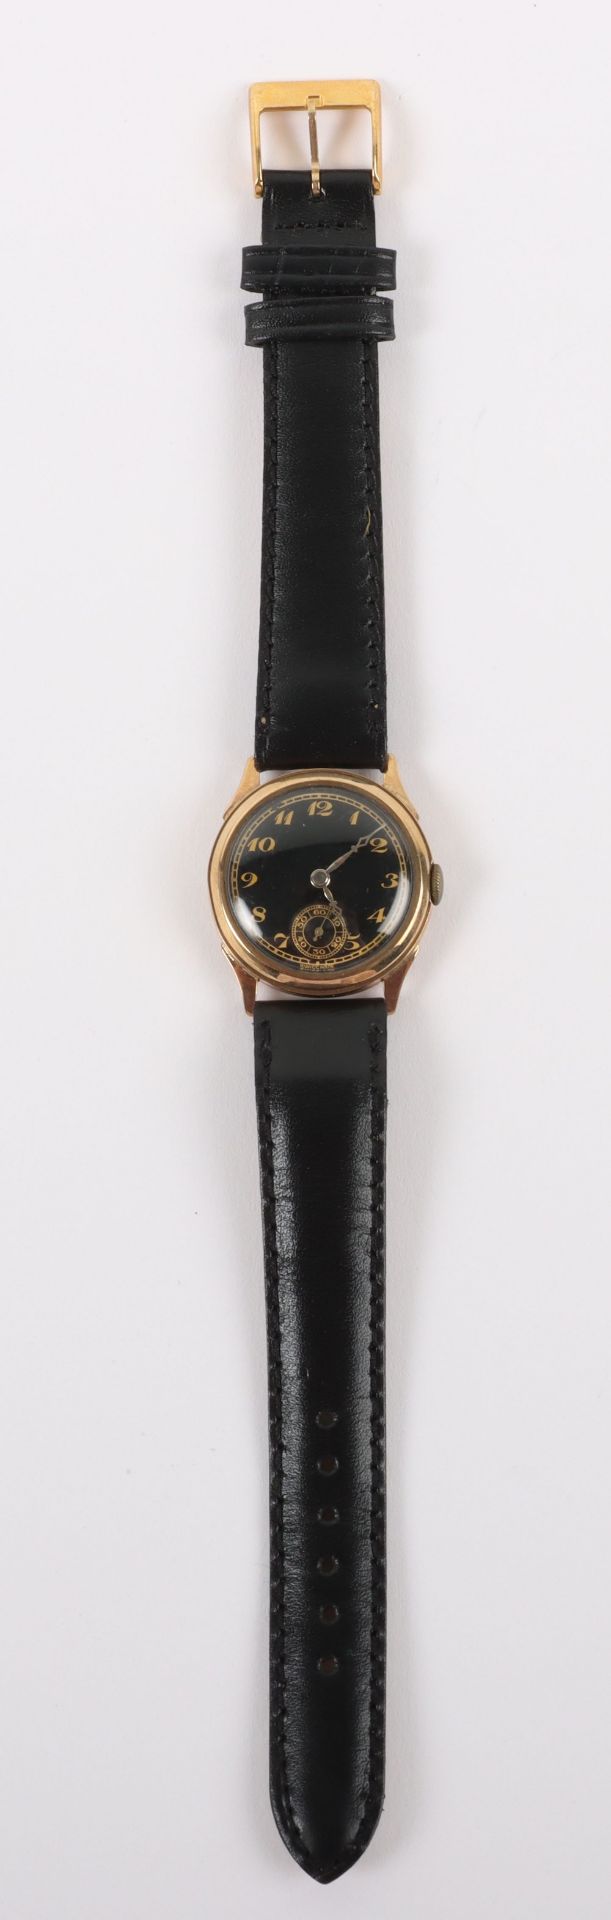 A vintage 9ct gold Swiss made wristwatch, circa 1940 - Image 2 of 7